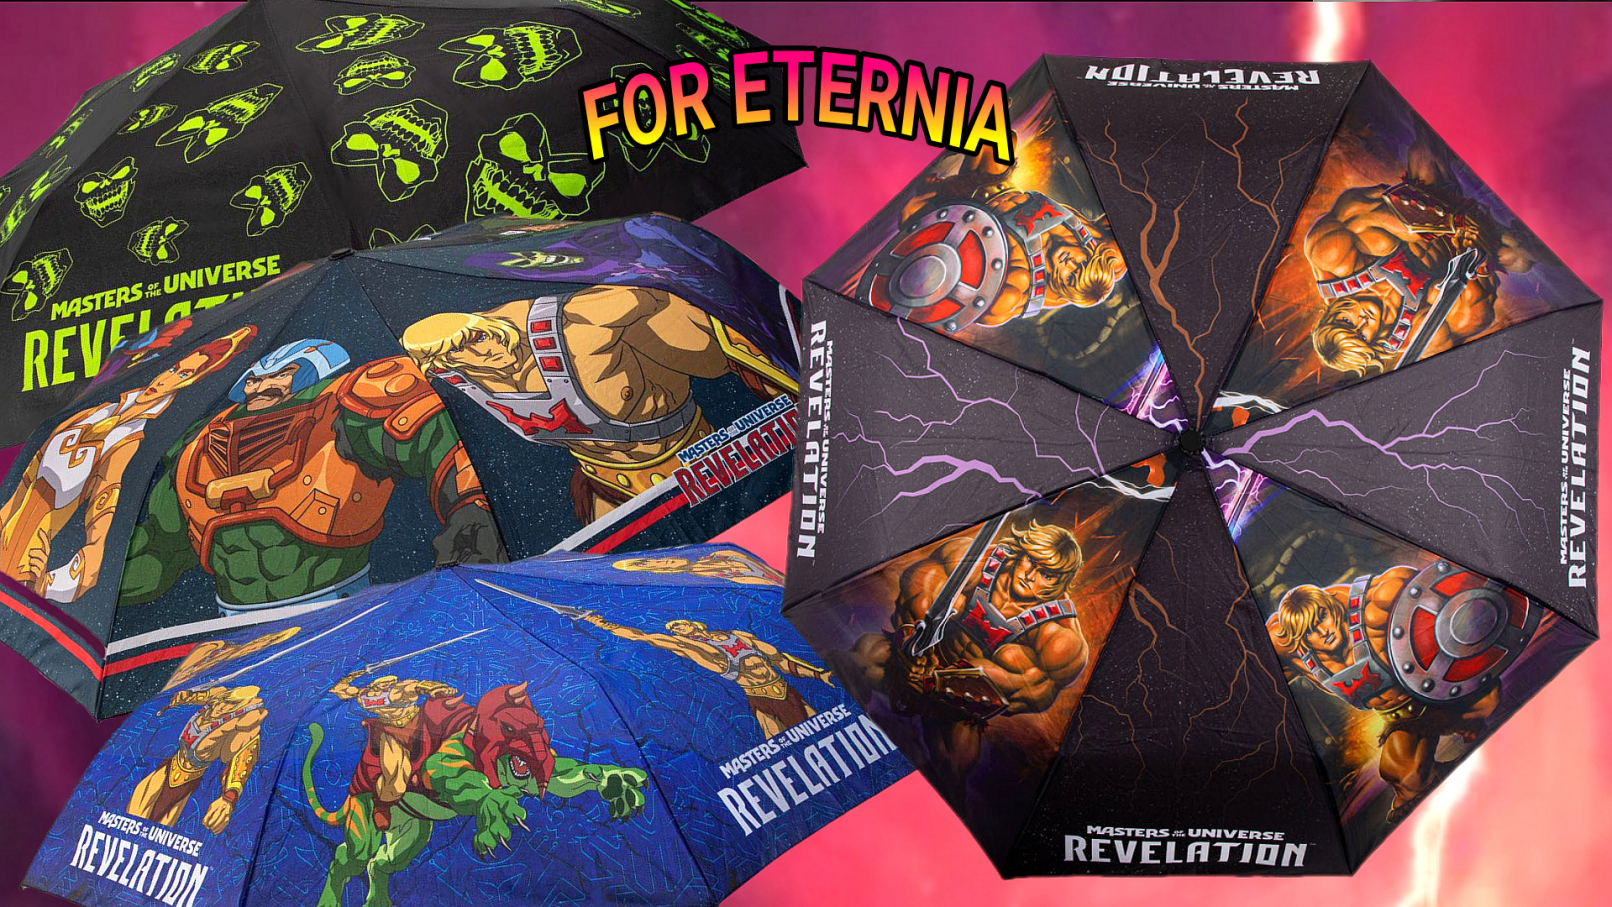 Masters of the Universe: Revelation Umbrellas are available from Cinereplicas